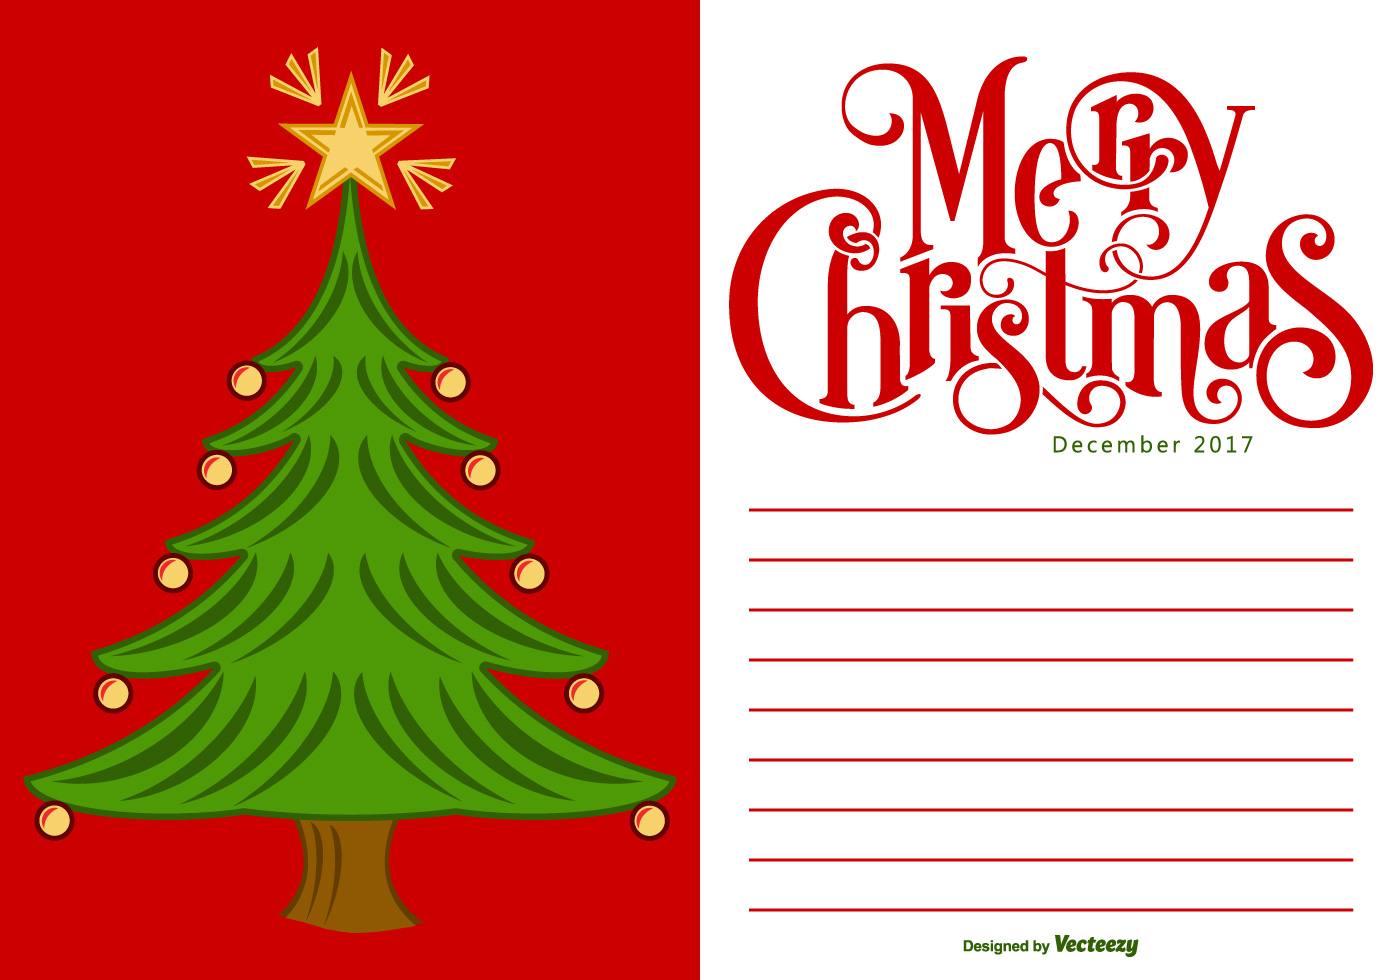 Download 2017 Merry Christmas Card Illustration - Download Free ...